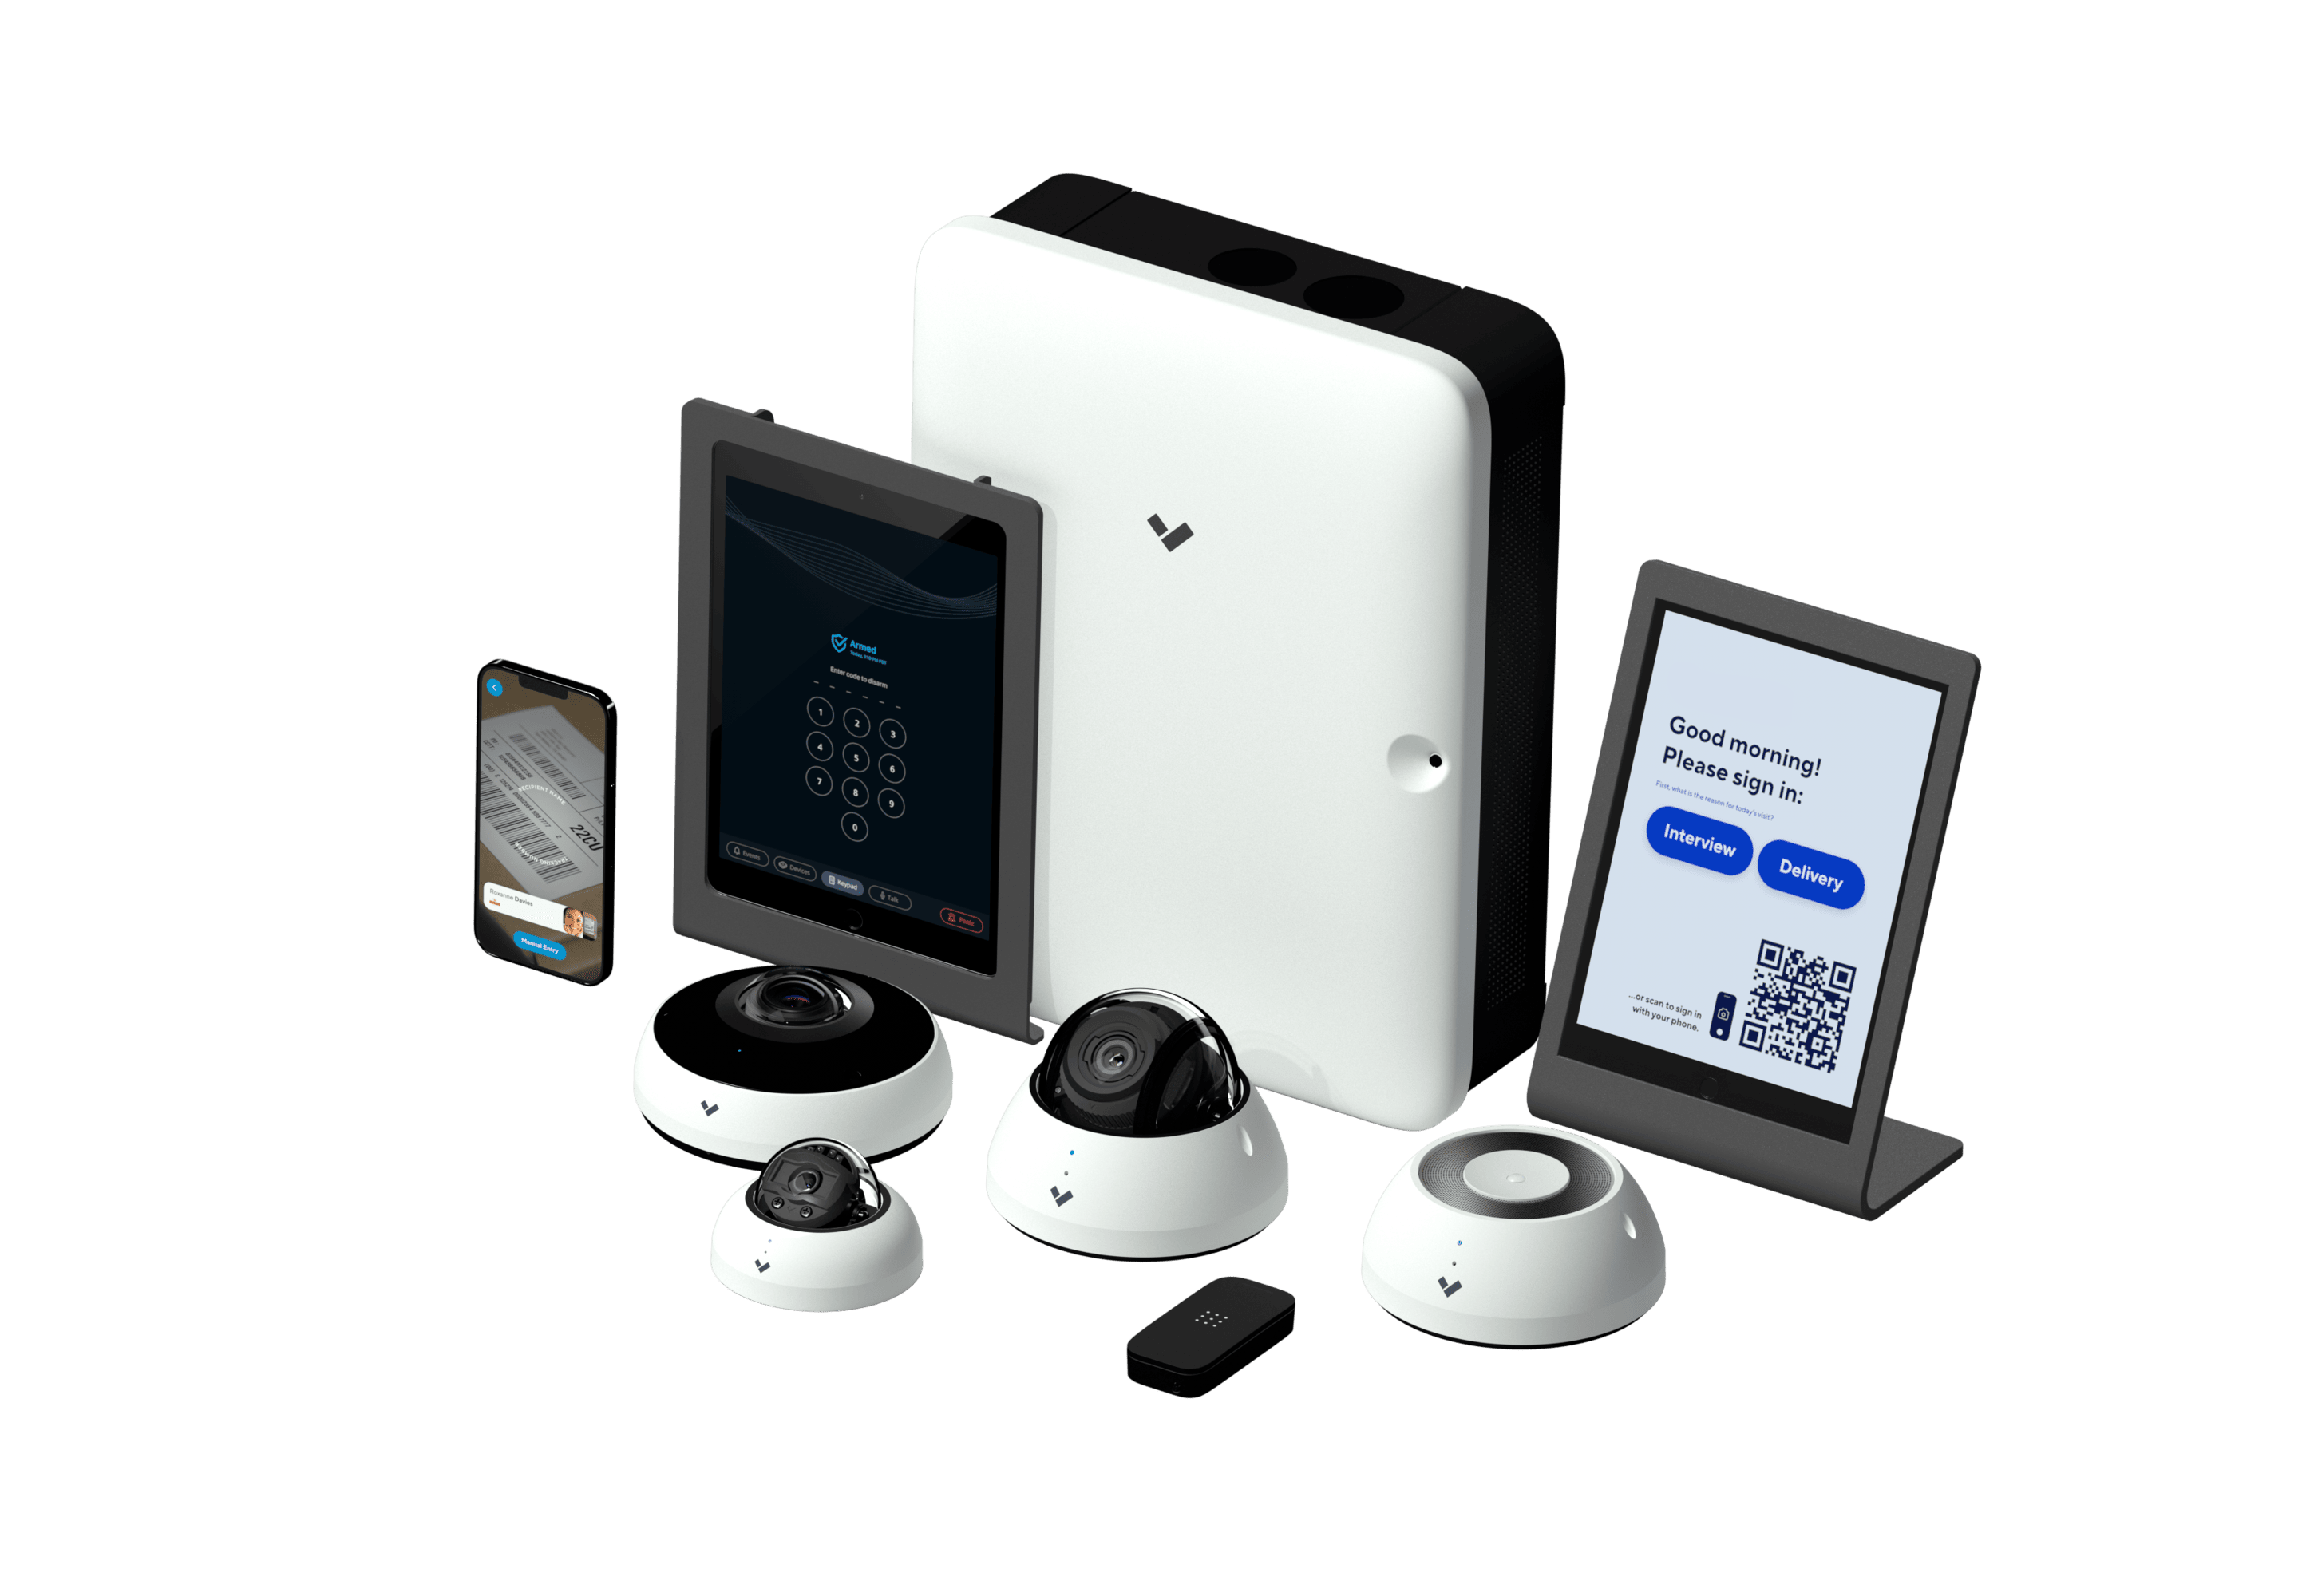 Verkada device family for security systems in Las Vegas